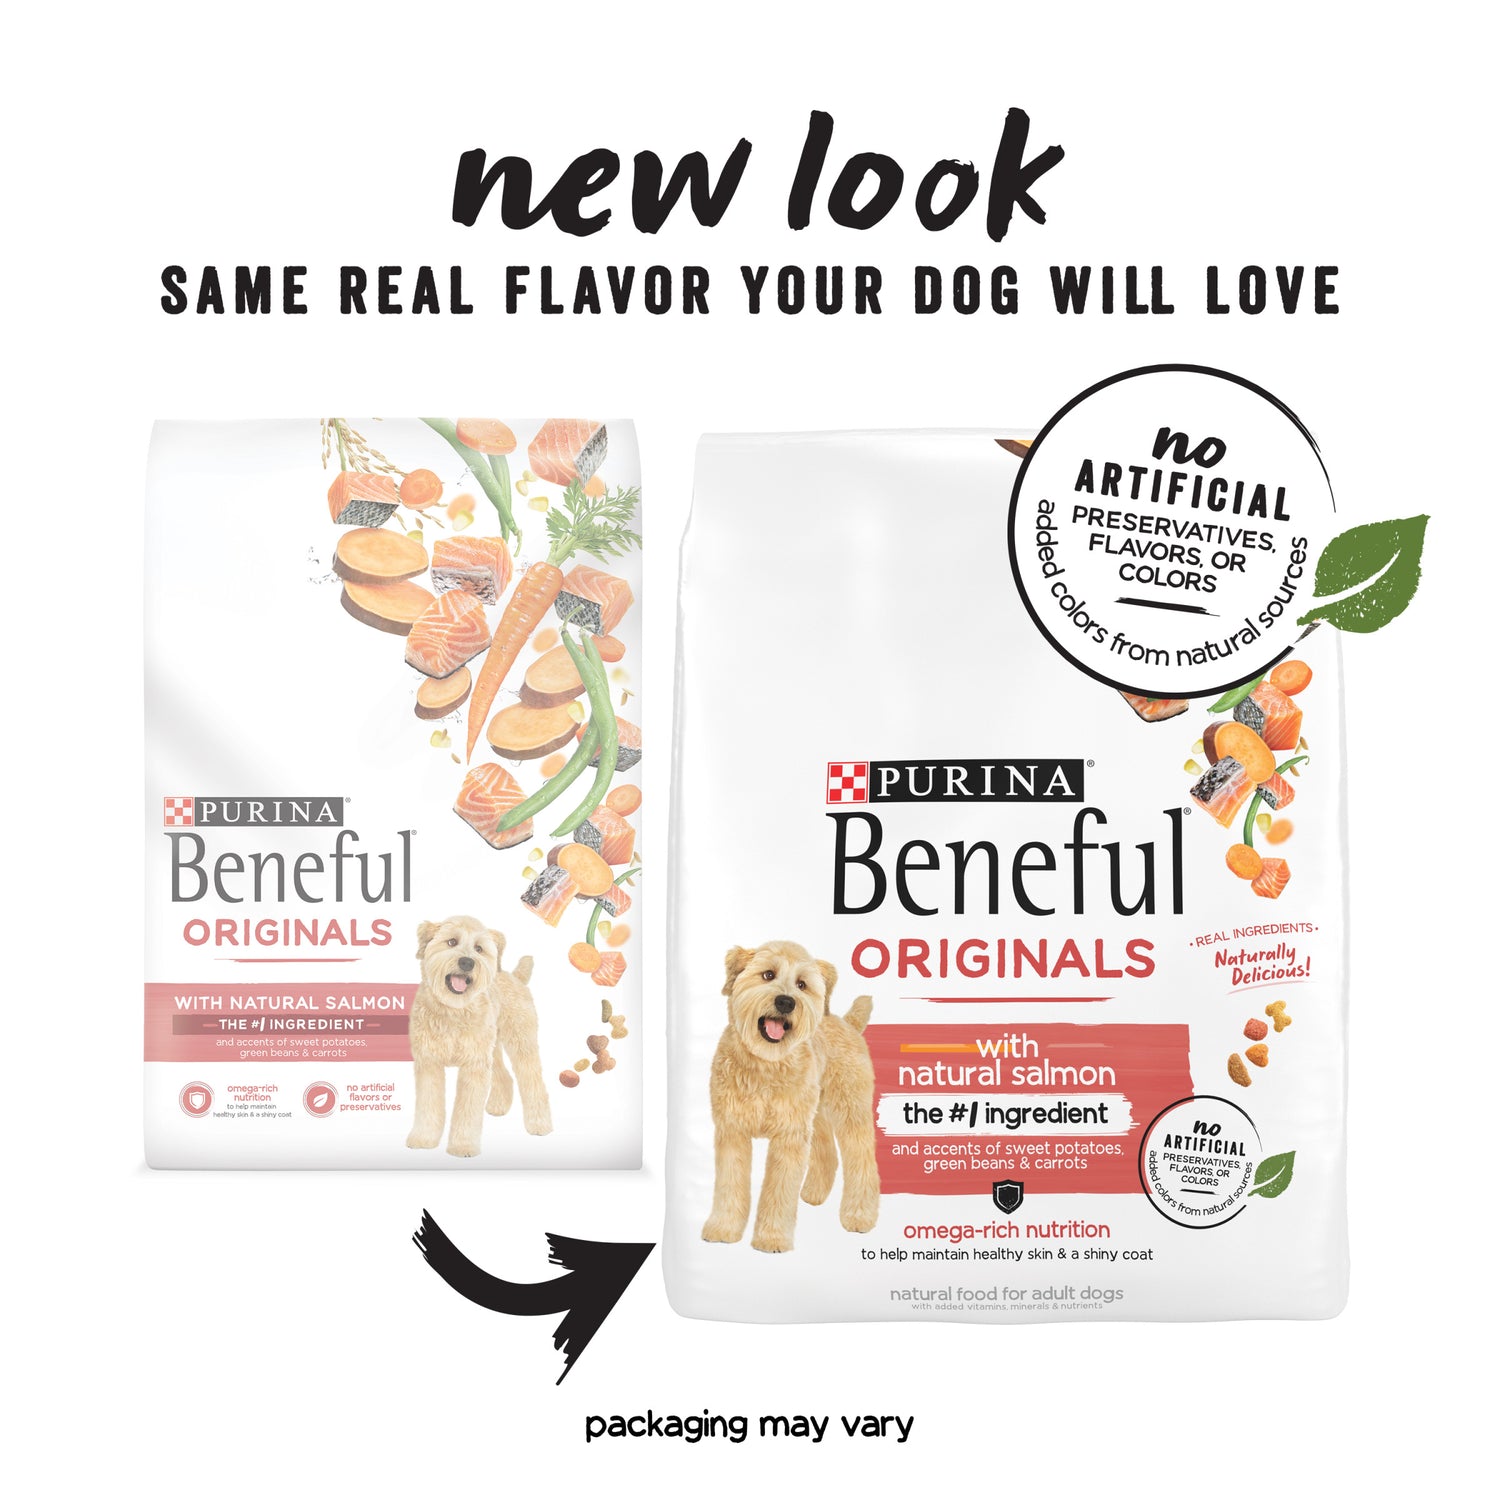 Purina Beneful Originals with Natural Salmon, Skin and Coat Support Dry Dog Food, 14 Lb. Bag